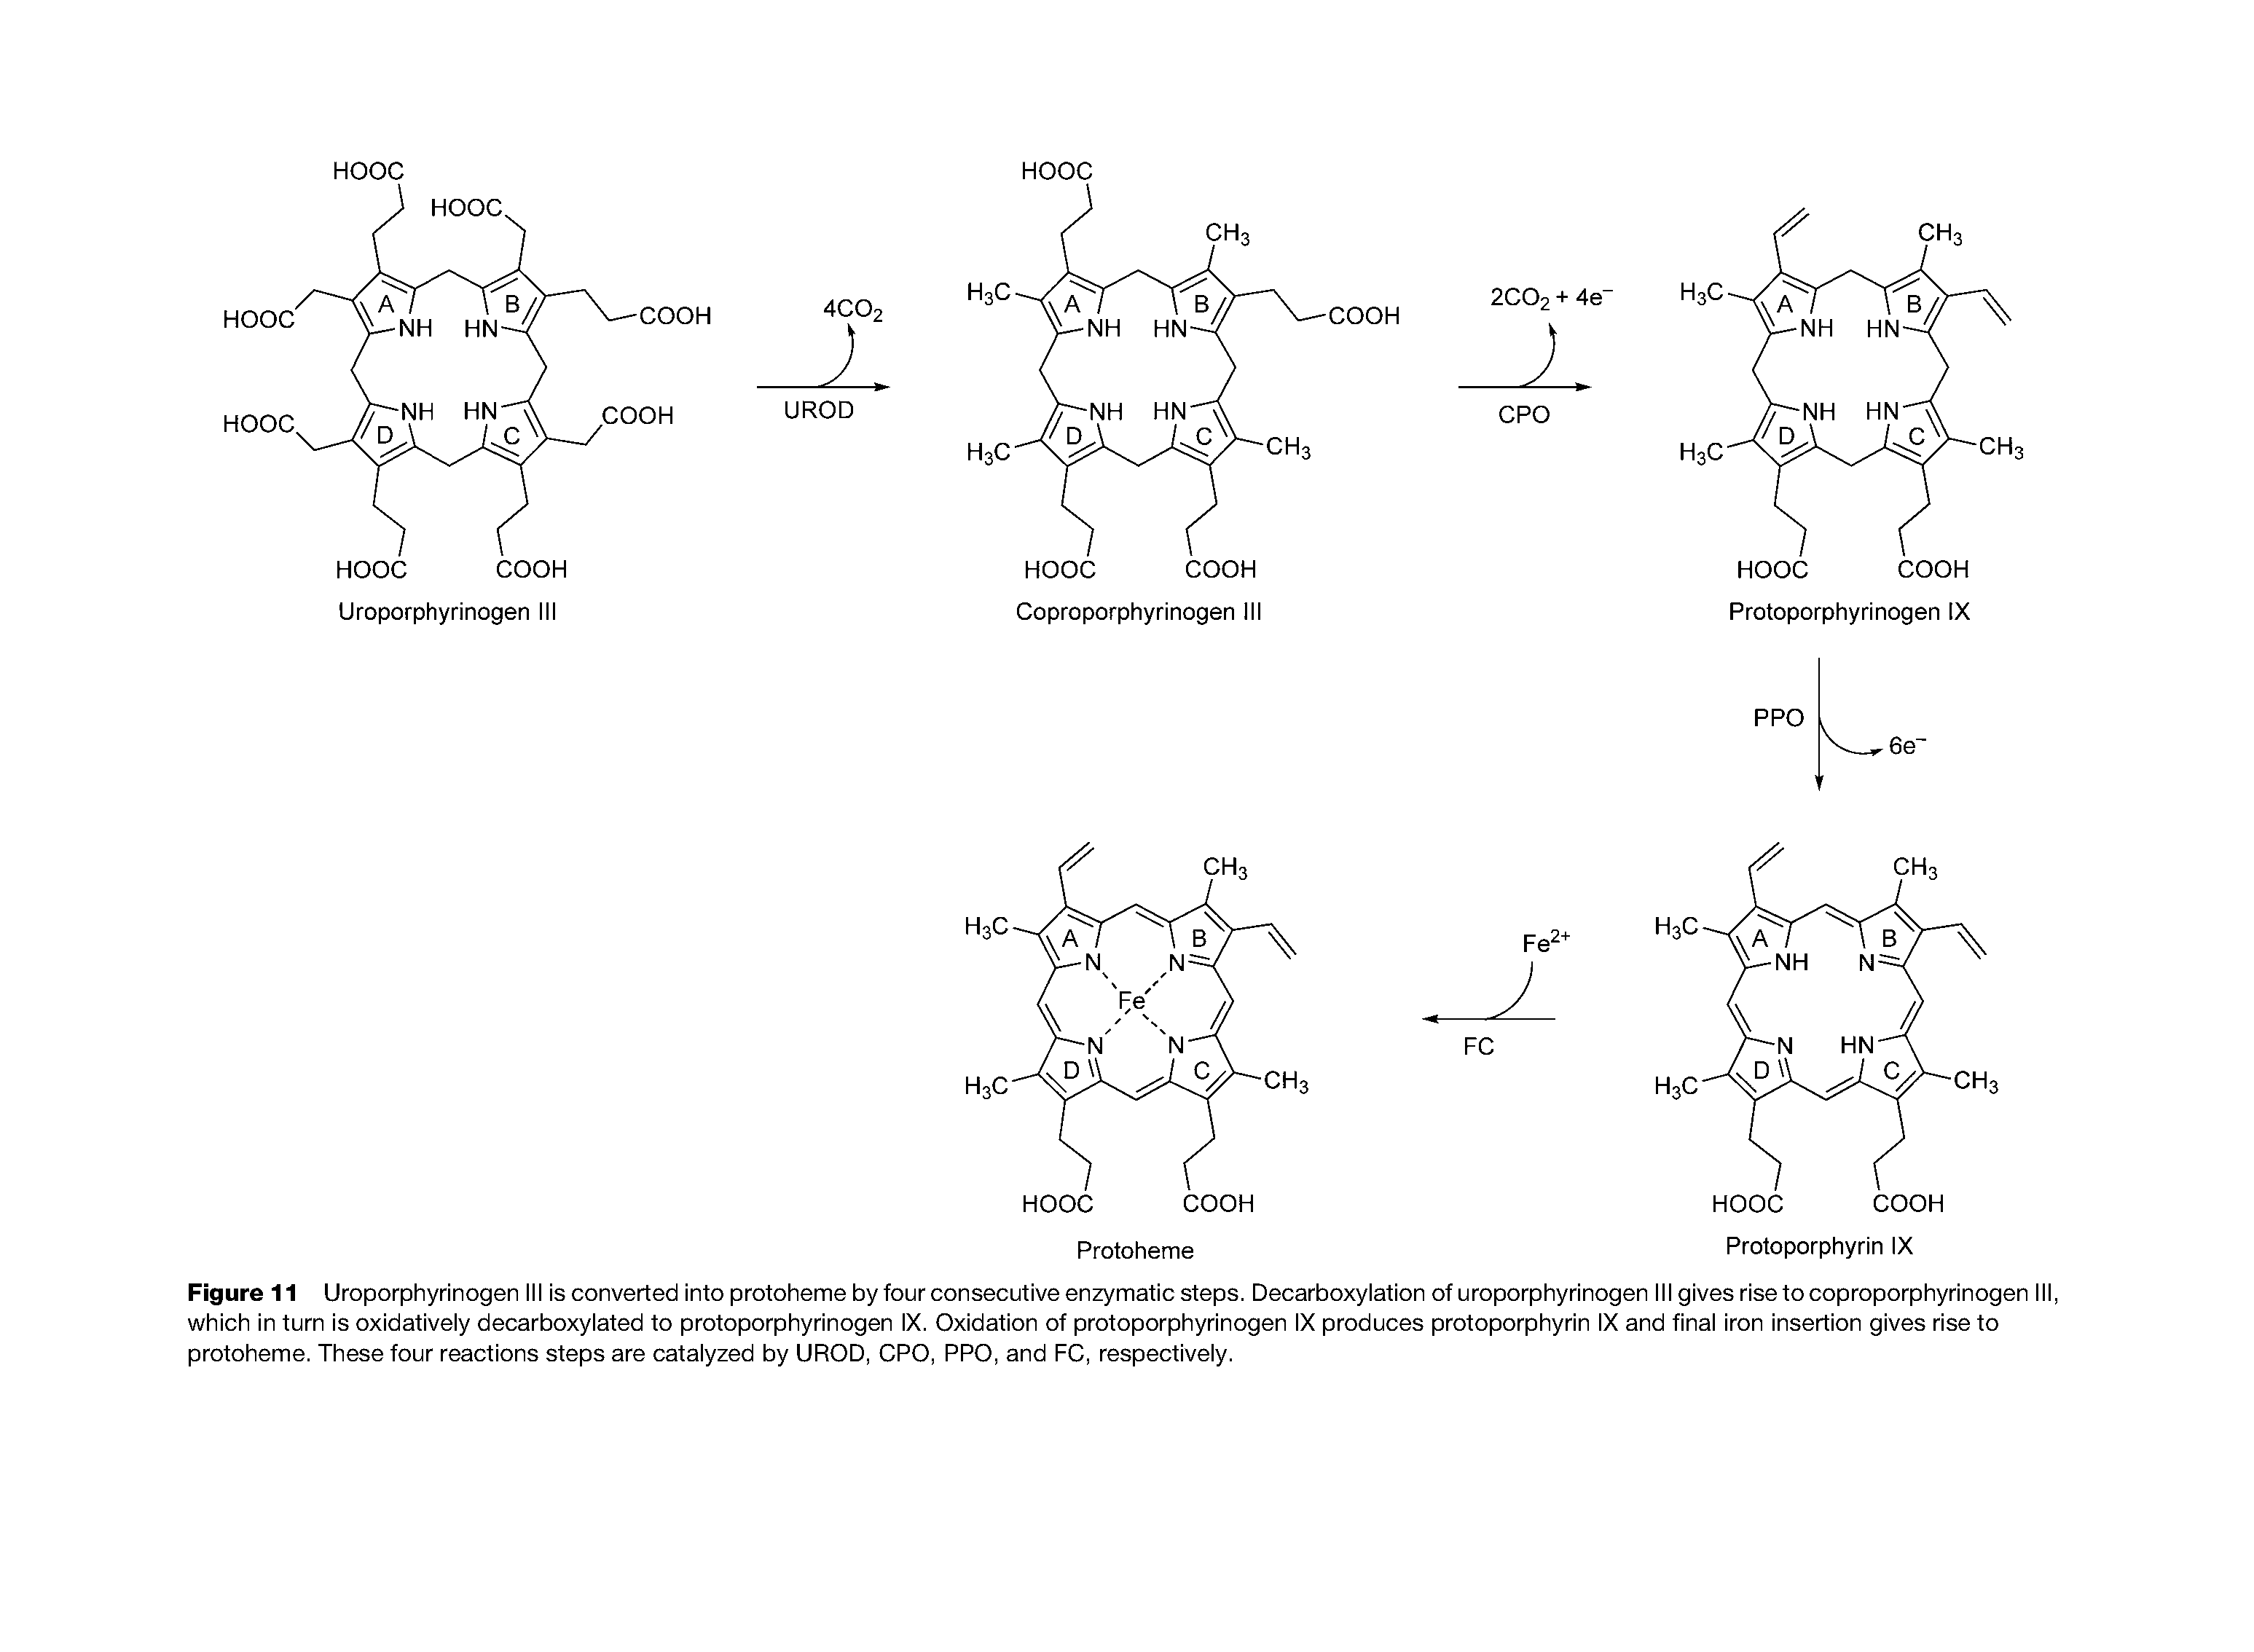 Figure 11 Uroporphyrinogen III is converted into protoheme by four consecutive enzymatic steps. Decarboxylation of uroporphyrinogen III gives rise to coproporphyrinogen I which in turn is oxidatively decarboxylated to protoporphyrinogen IX. Oxidation of protoporphyrinogen IX produces protoporphyrin IX and final iron insertion gives rise to protoheme. These four reactions steps are catalyzed by UROD, OPO, PPO, and FO, respectively.